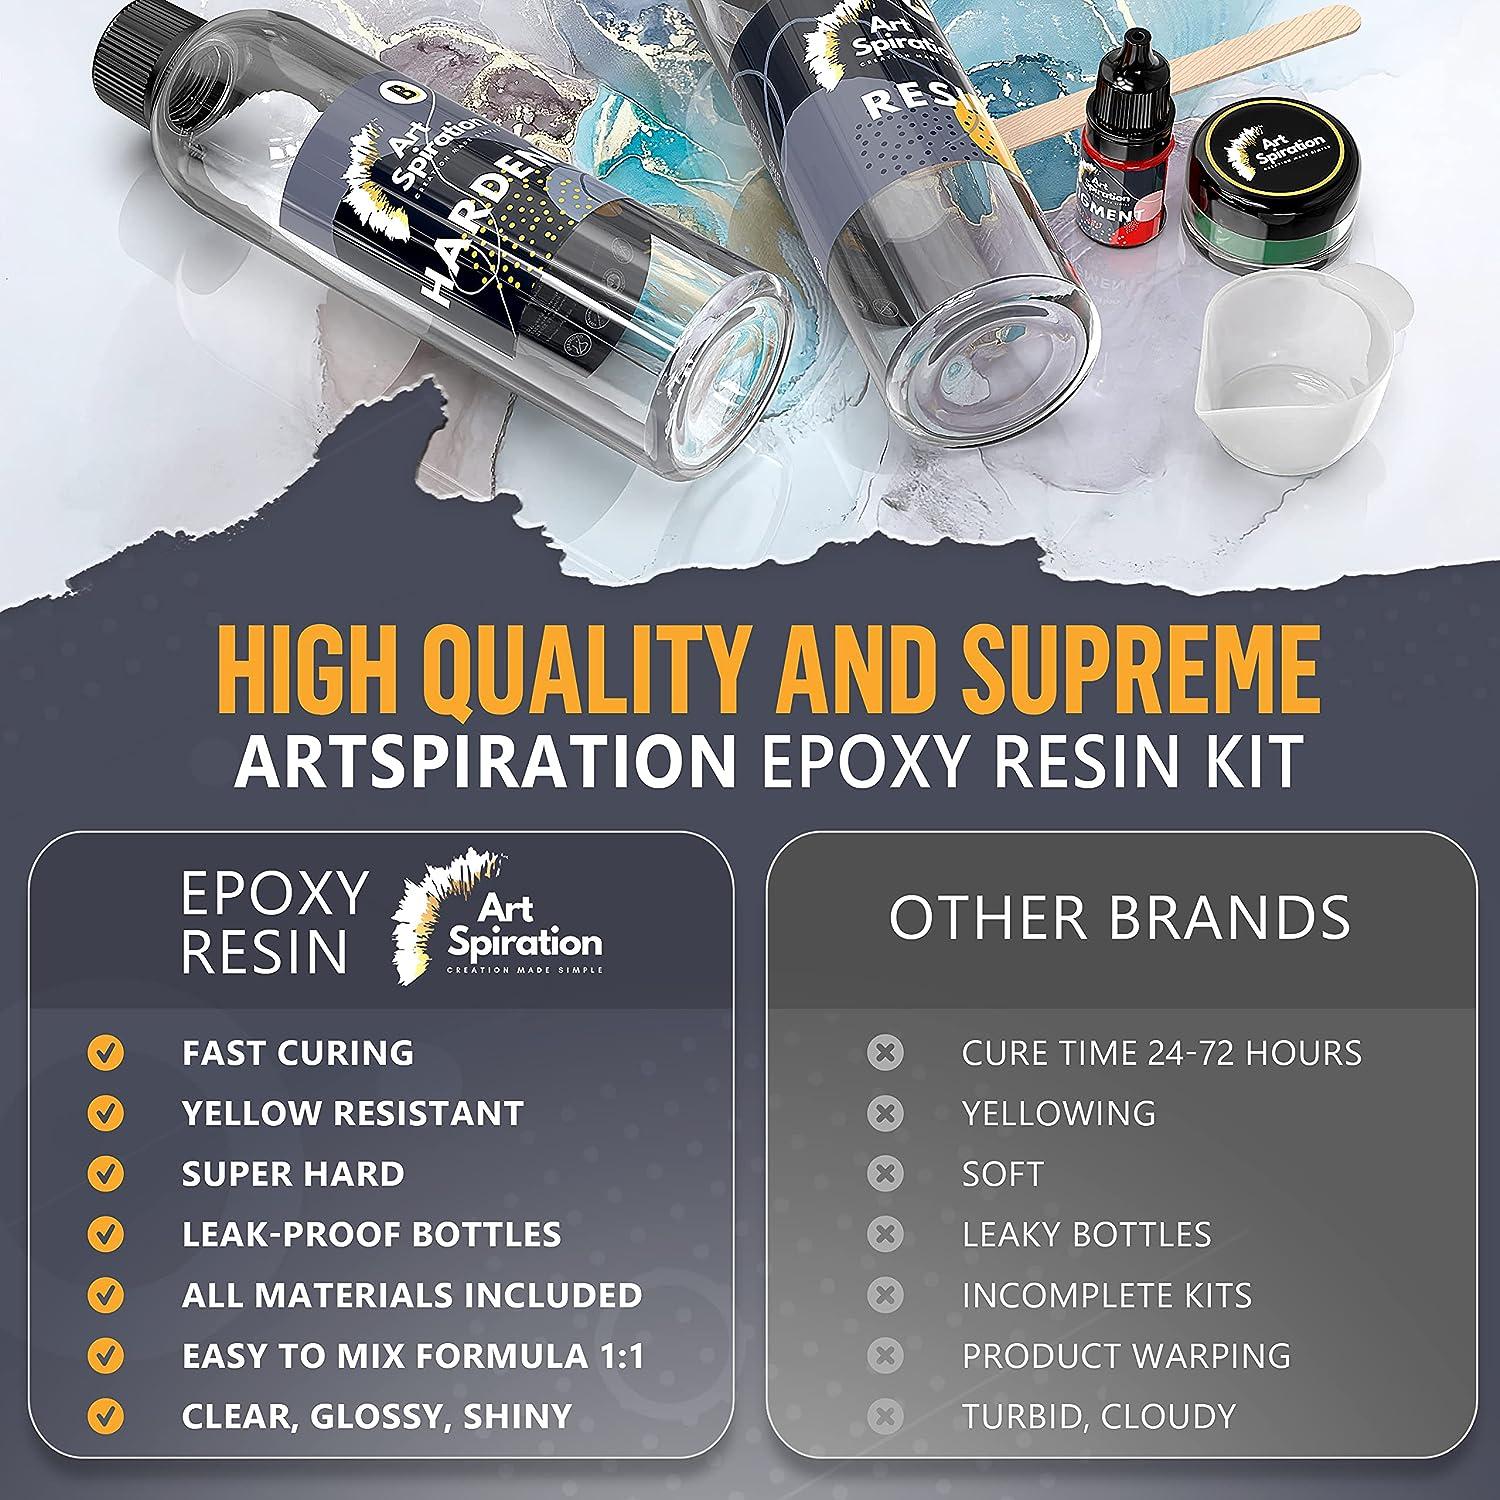 16oz. Epoxy Resin Starter Set with Accessories